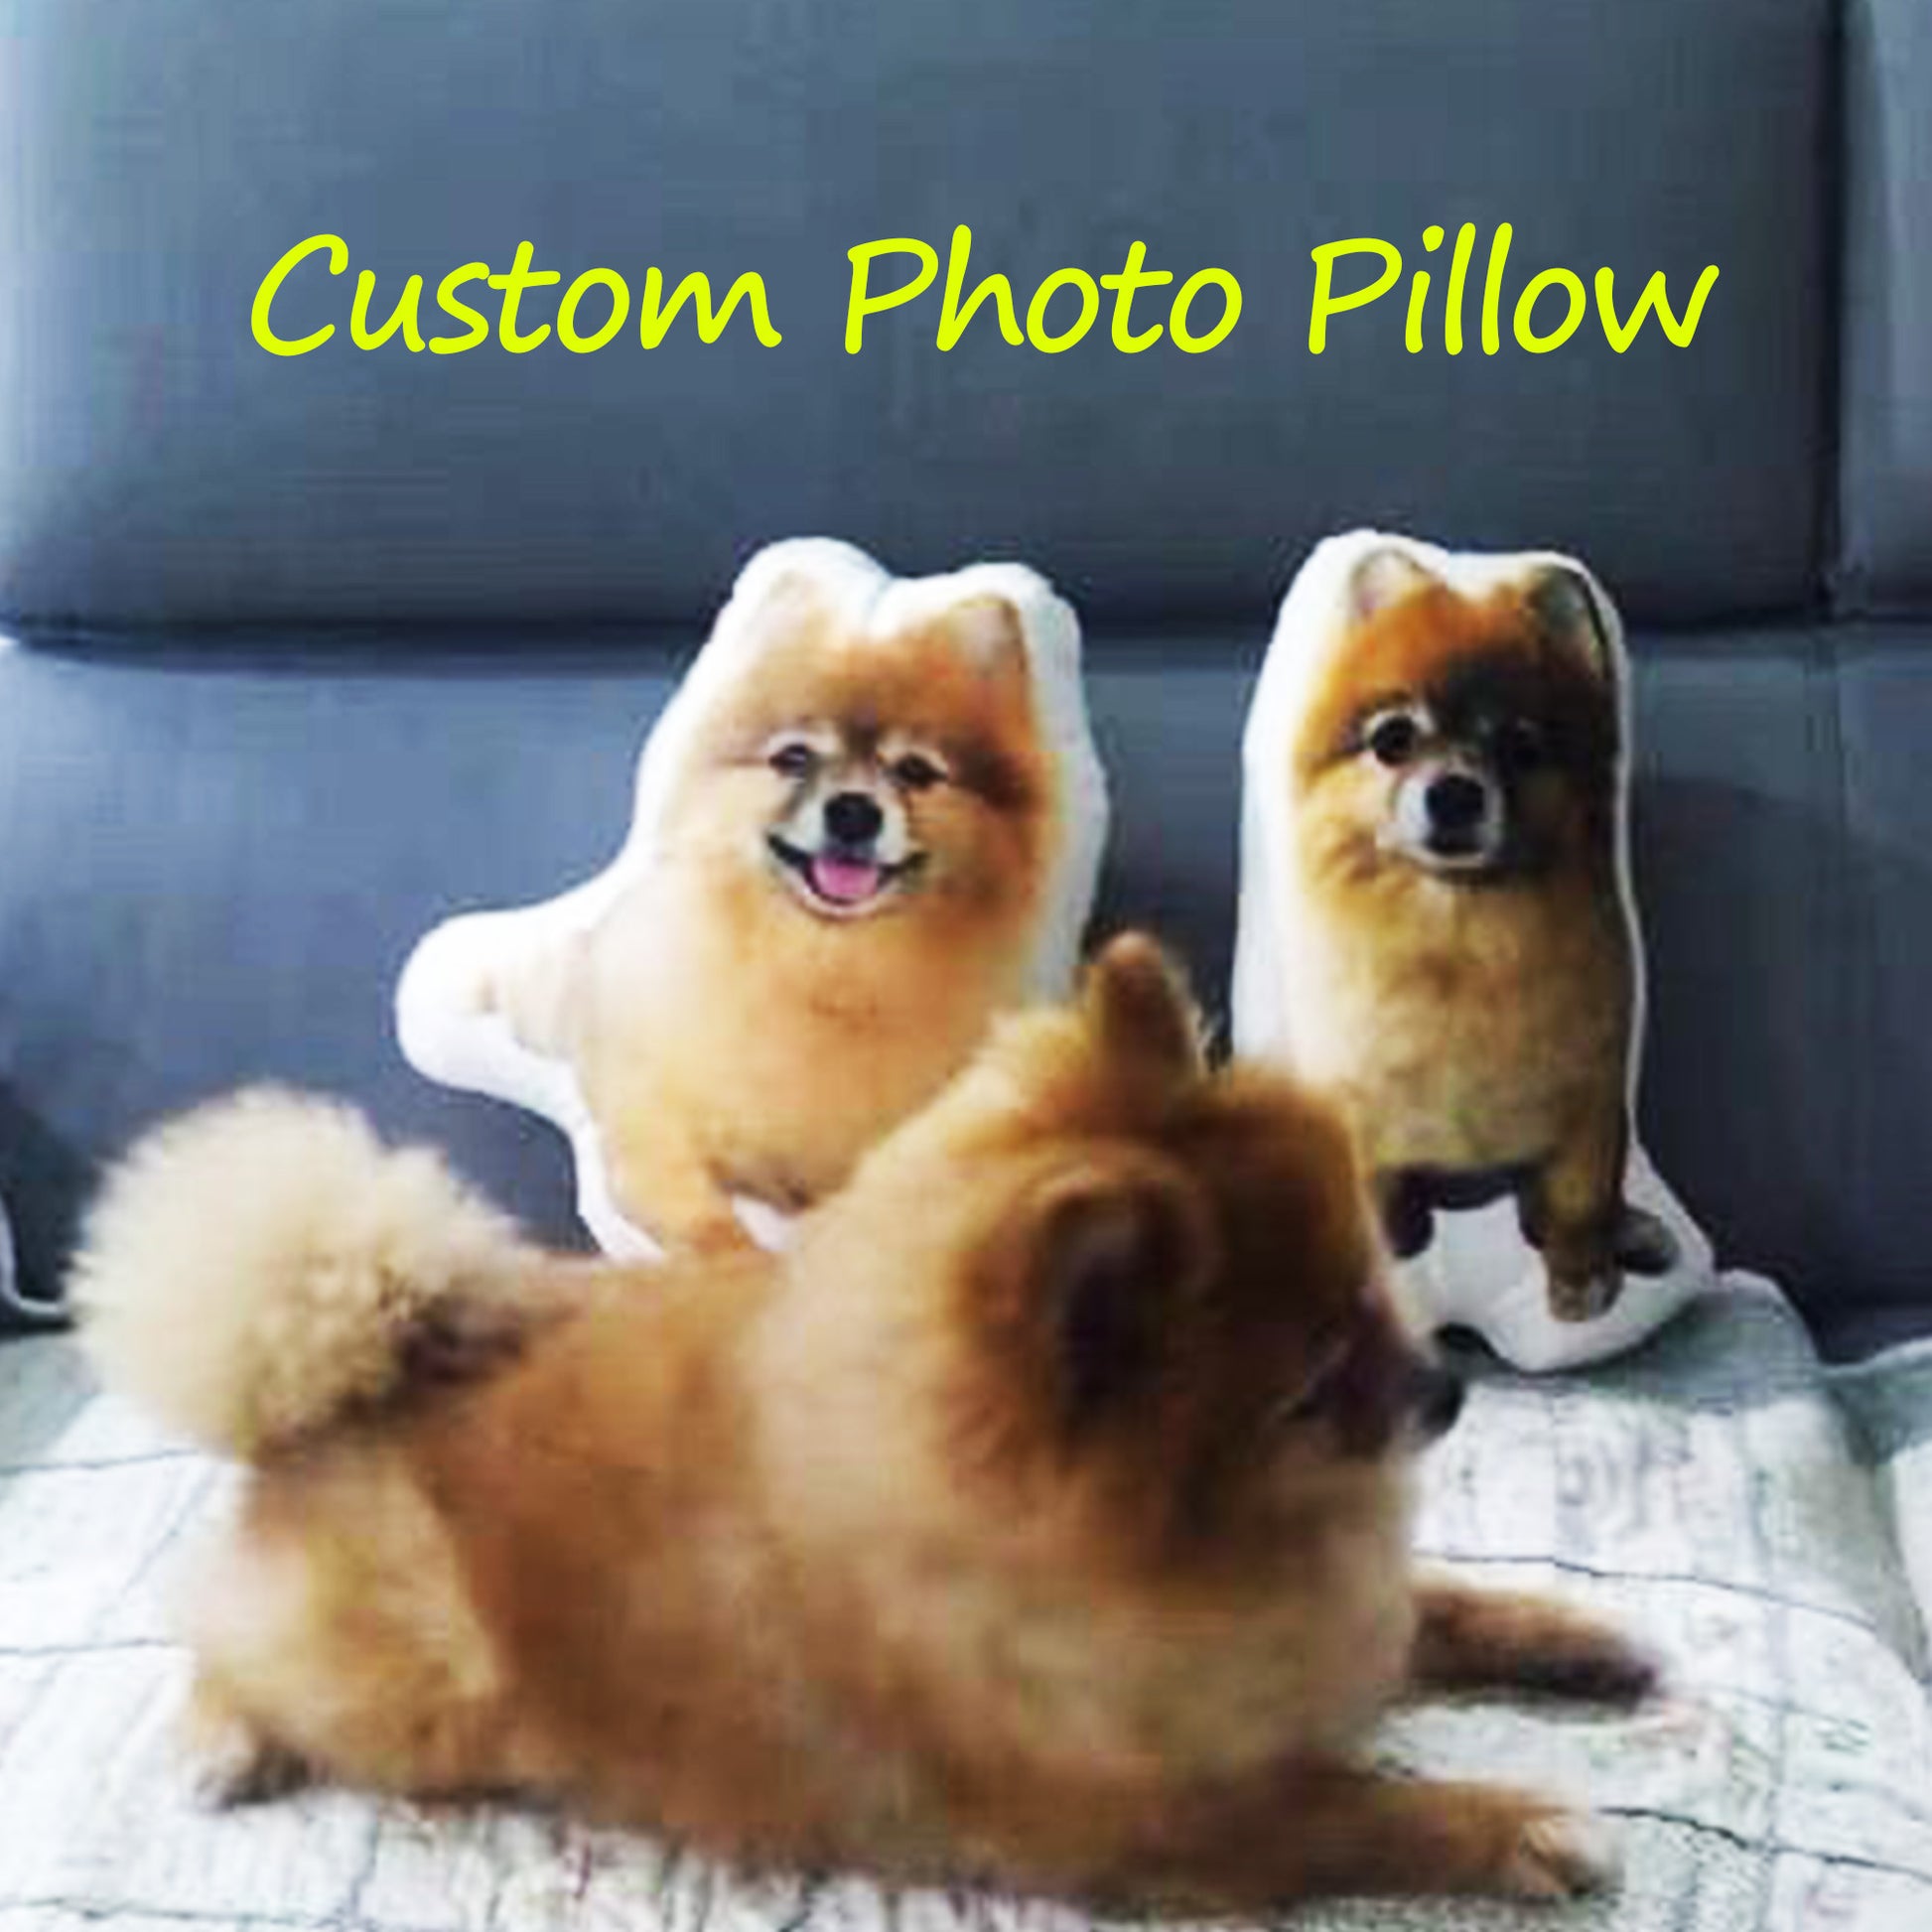 A Pomeranian is sitting on the bed, with two plush toys with personalized covers printed with two of its different shapes of photos behind it